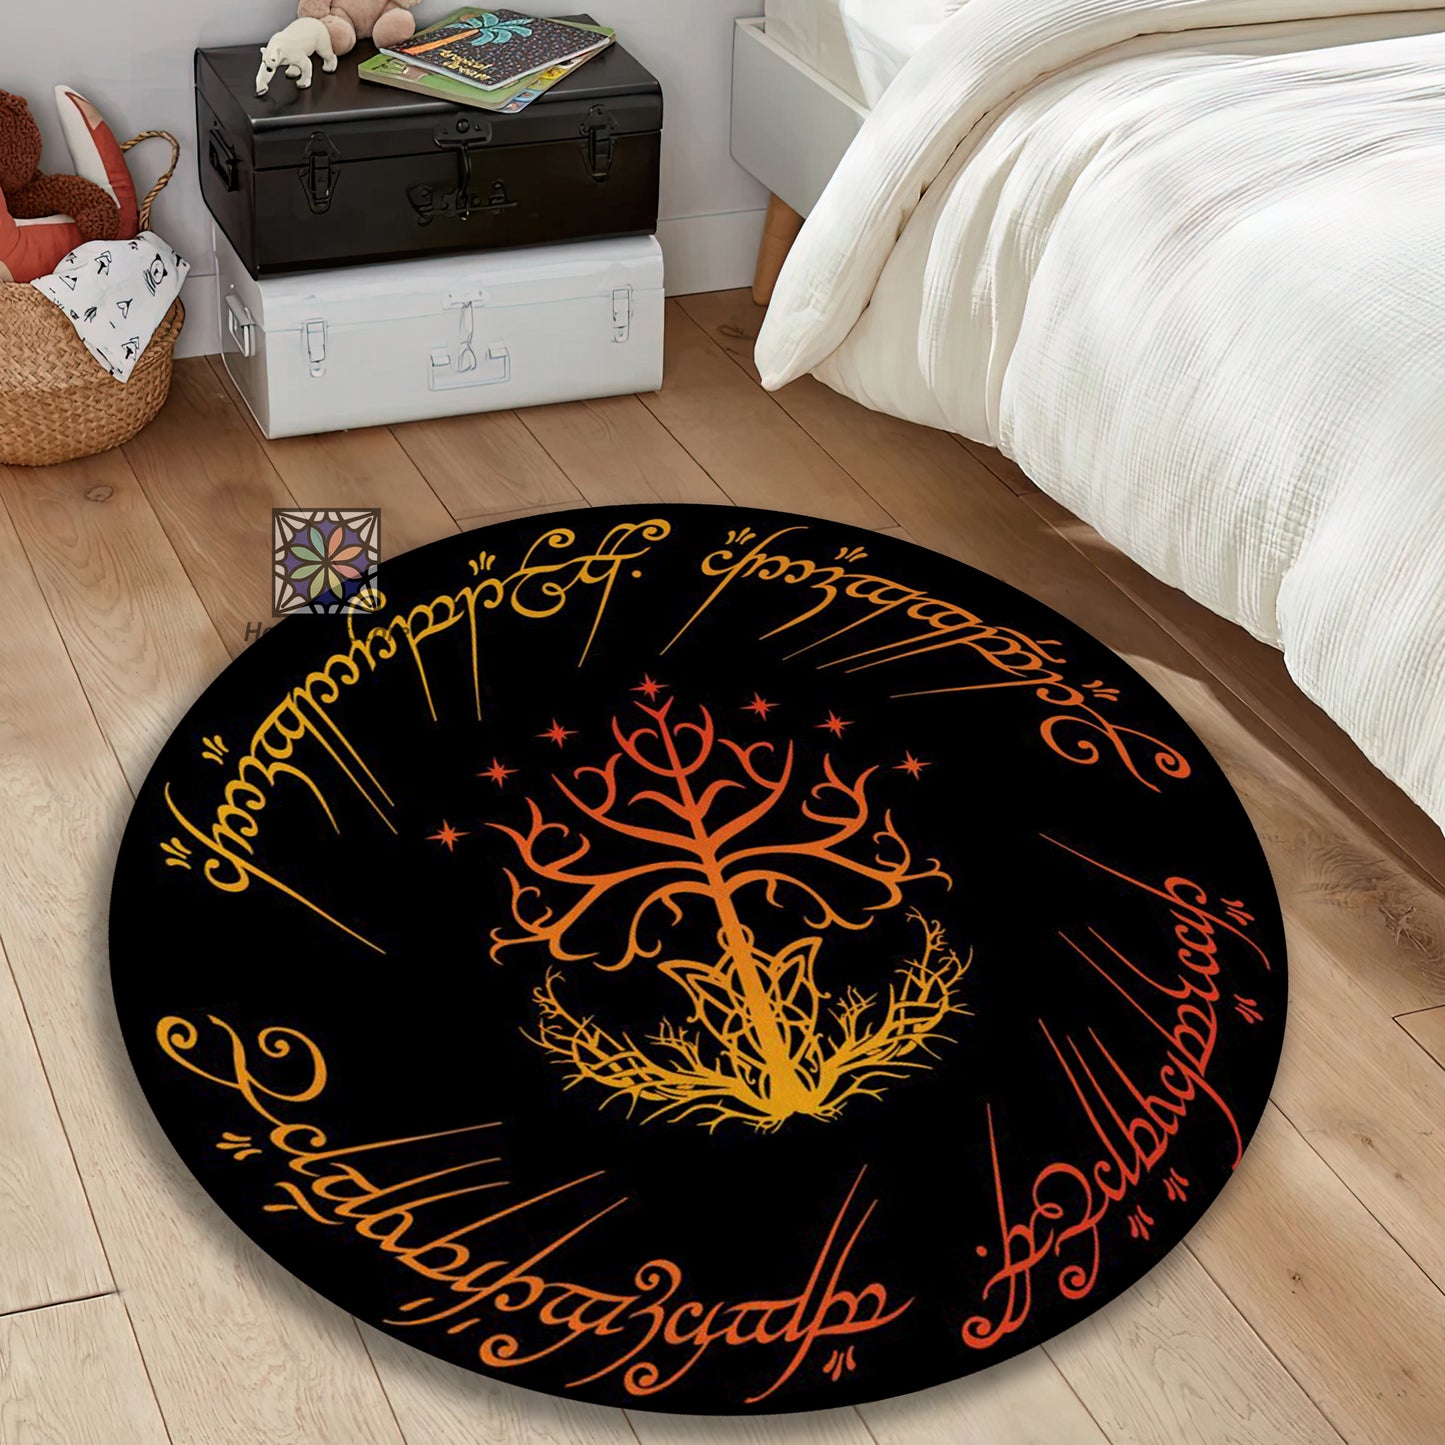 Lord Rug, Fantastic Movie Carpet, The Lord of The Rings Mat, Movie Room Decor, Hobbiton Rug